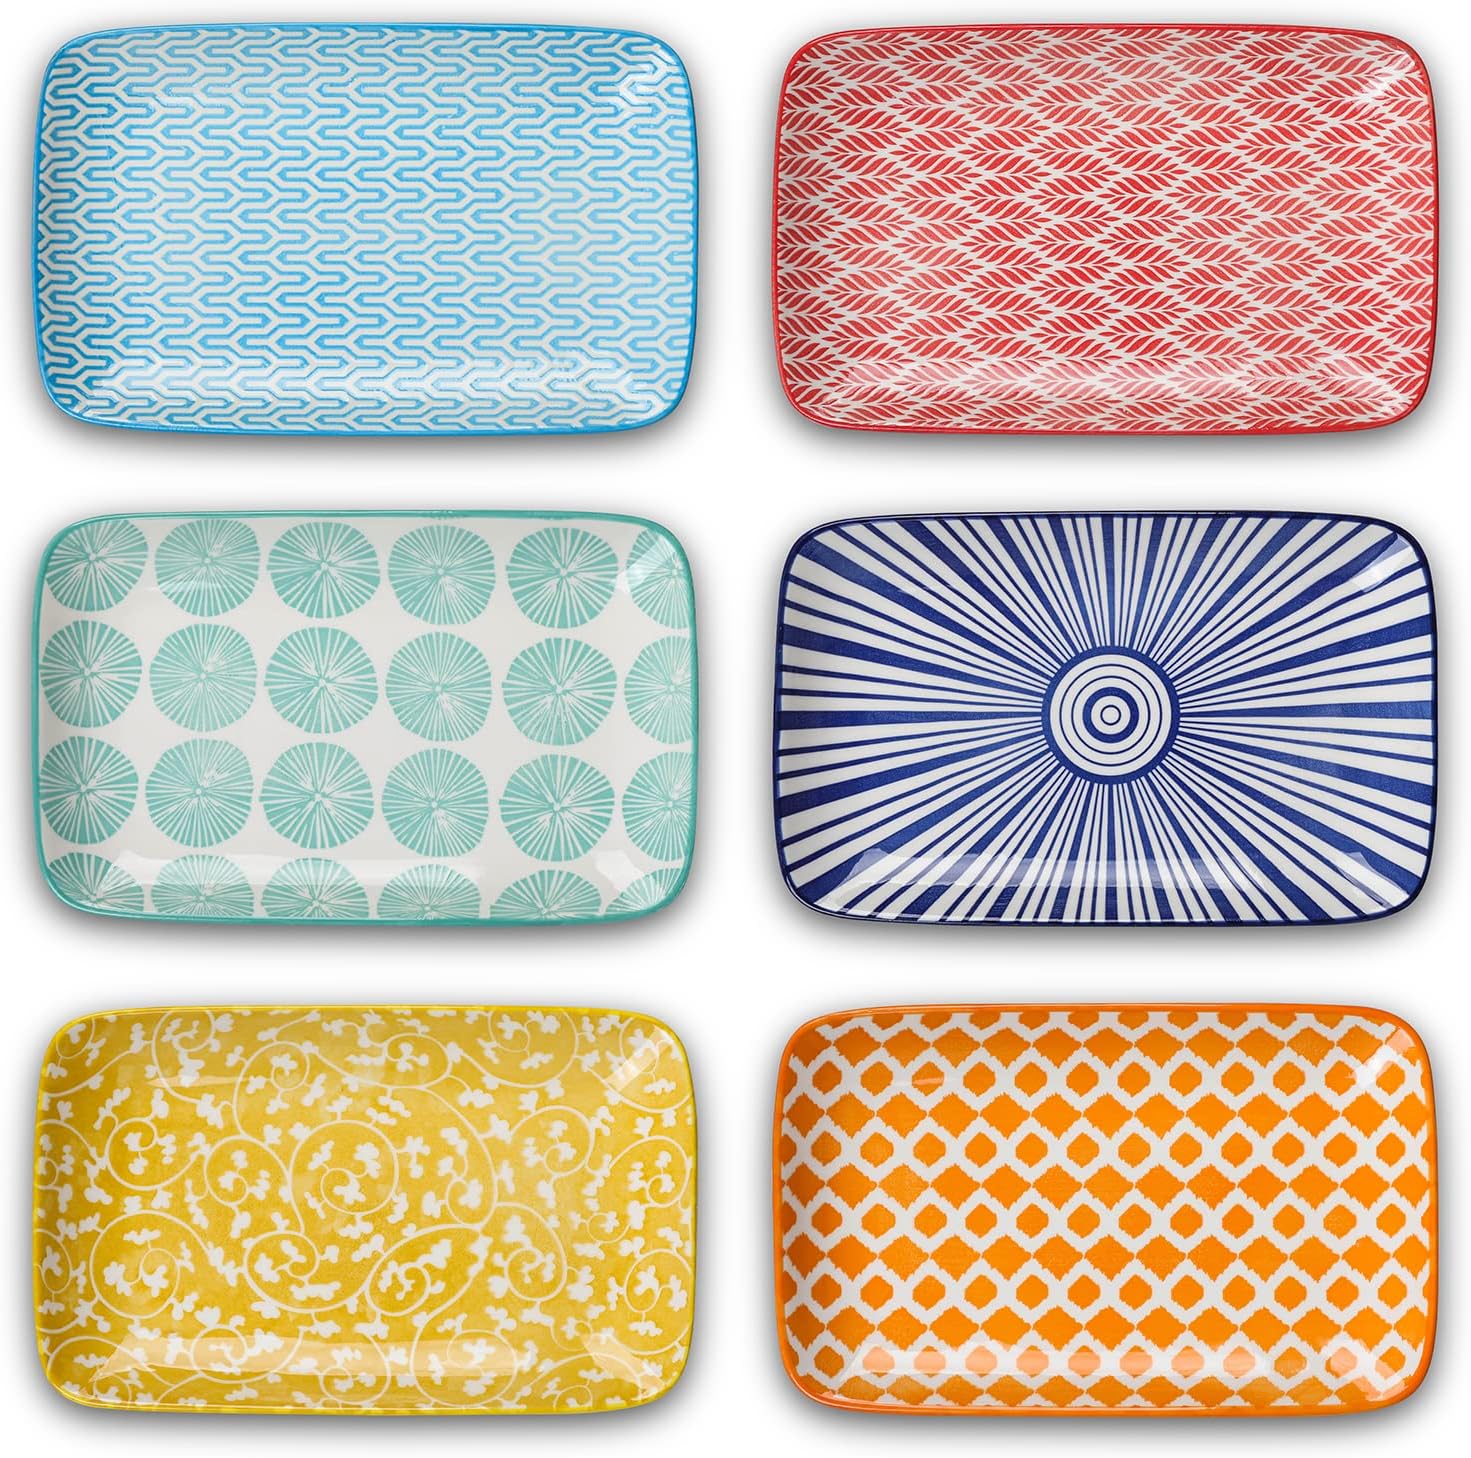 Selamica Ceramic 9.5 Inch Large Rectangular Salad Plates, Dinner Plates, Pasta Dessert Plates Serving Platters and Trays for Appetizer, Sushi, Fruit, Set of 6, Assorted Colors